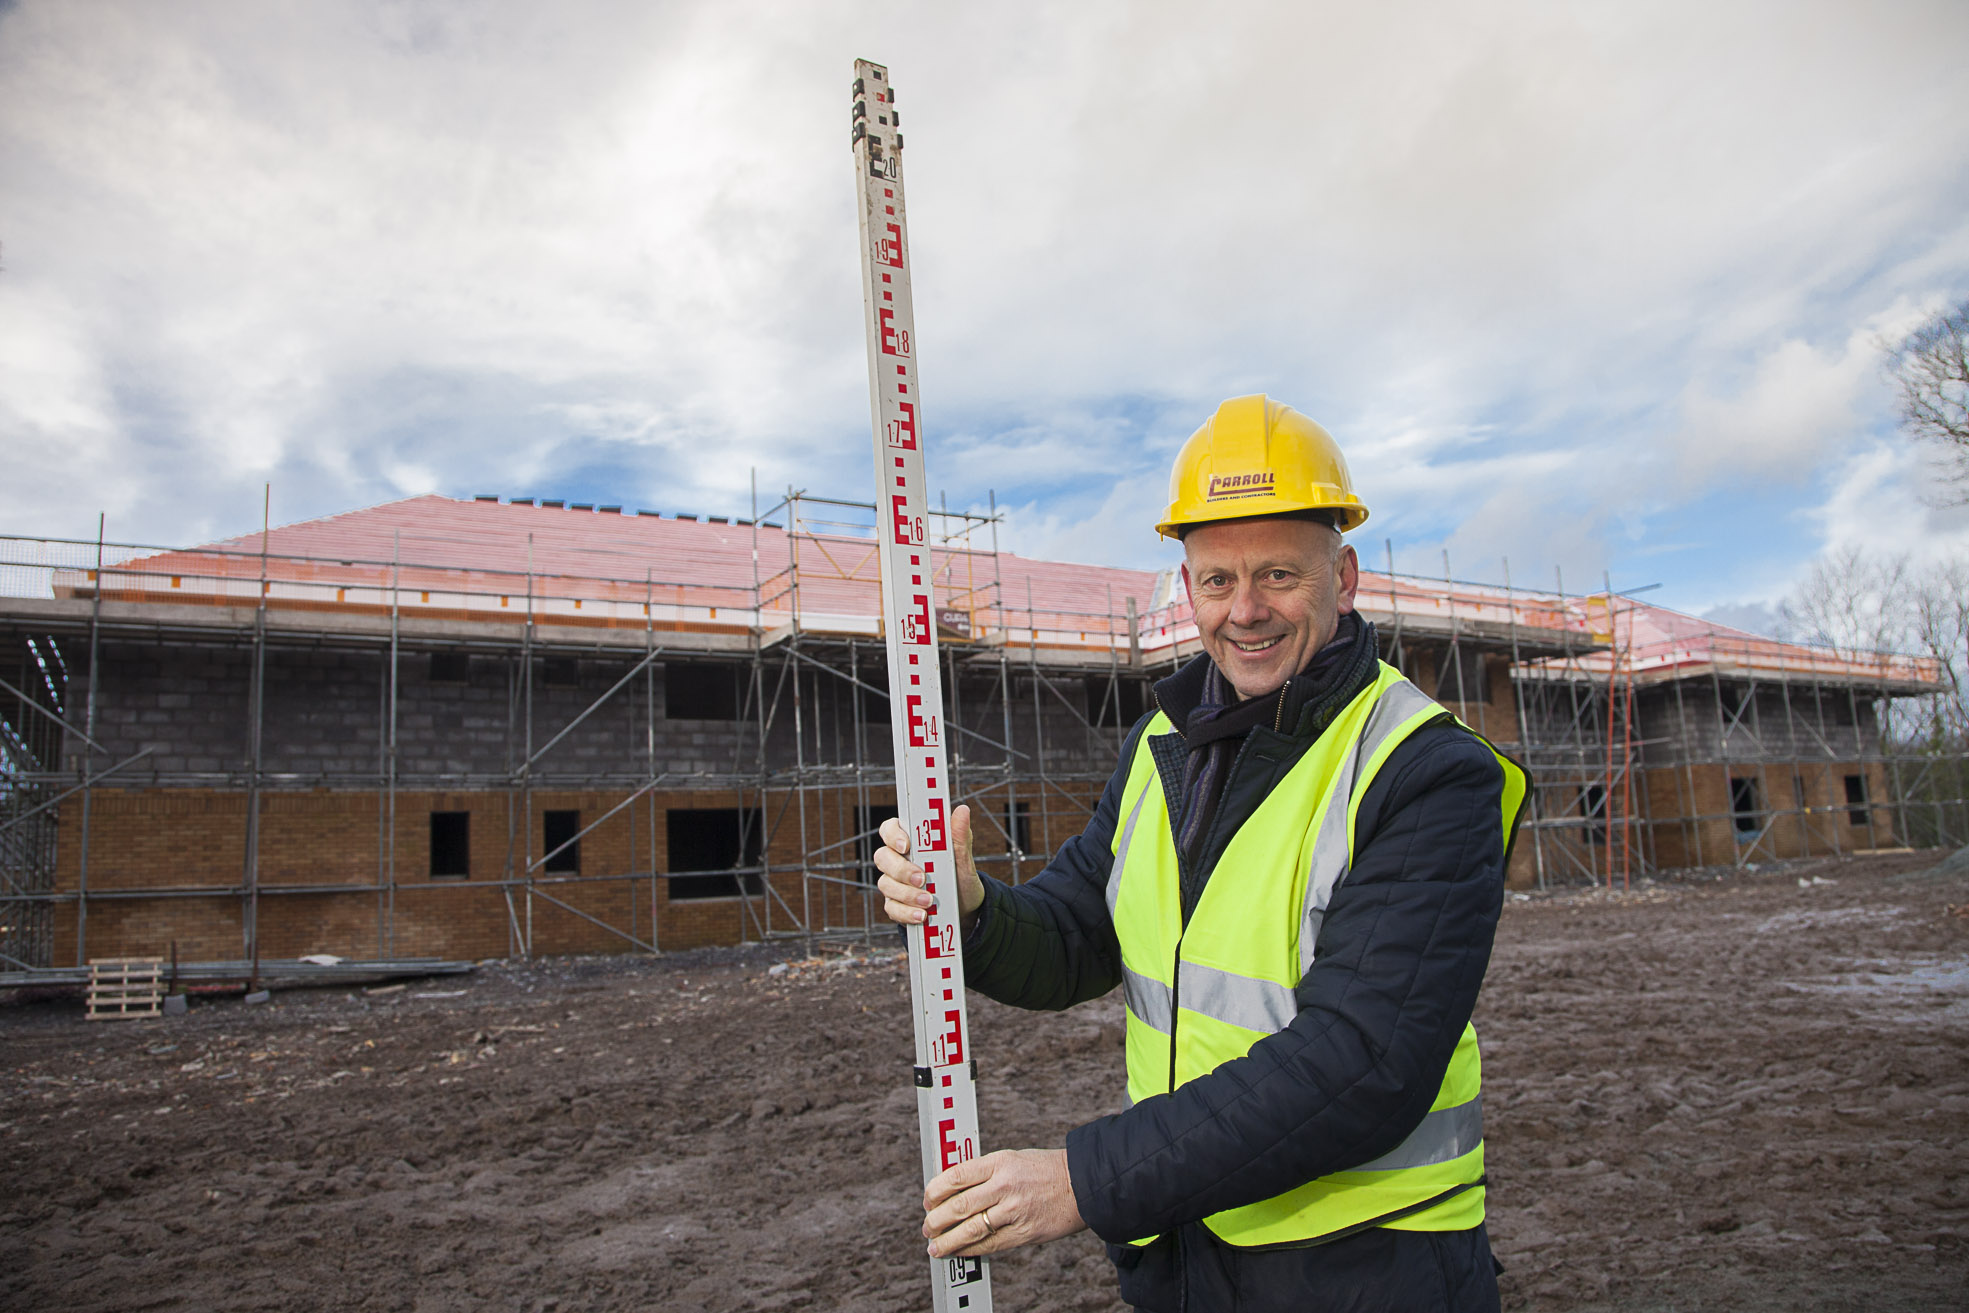 All systems go to create 100 new jobs at pioneering dementia care centre